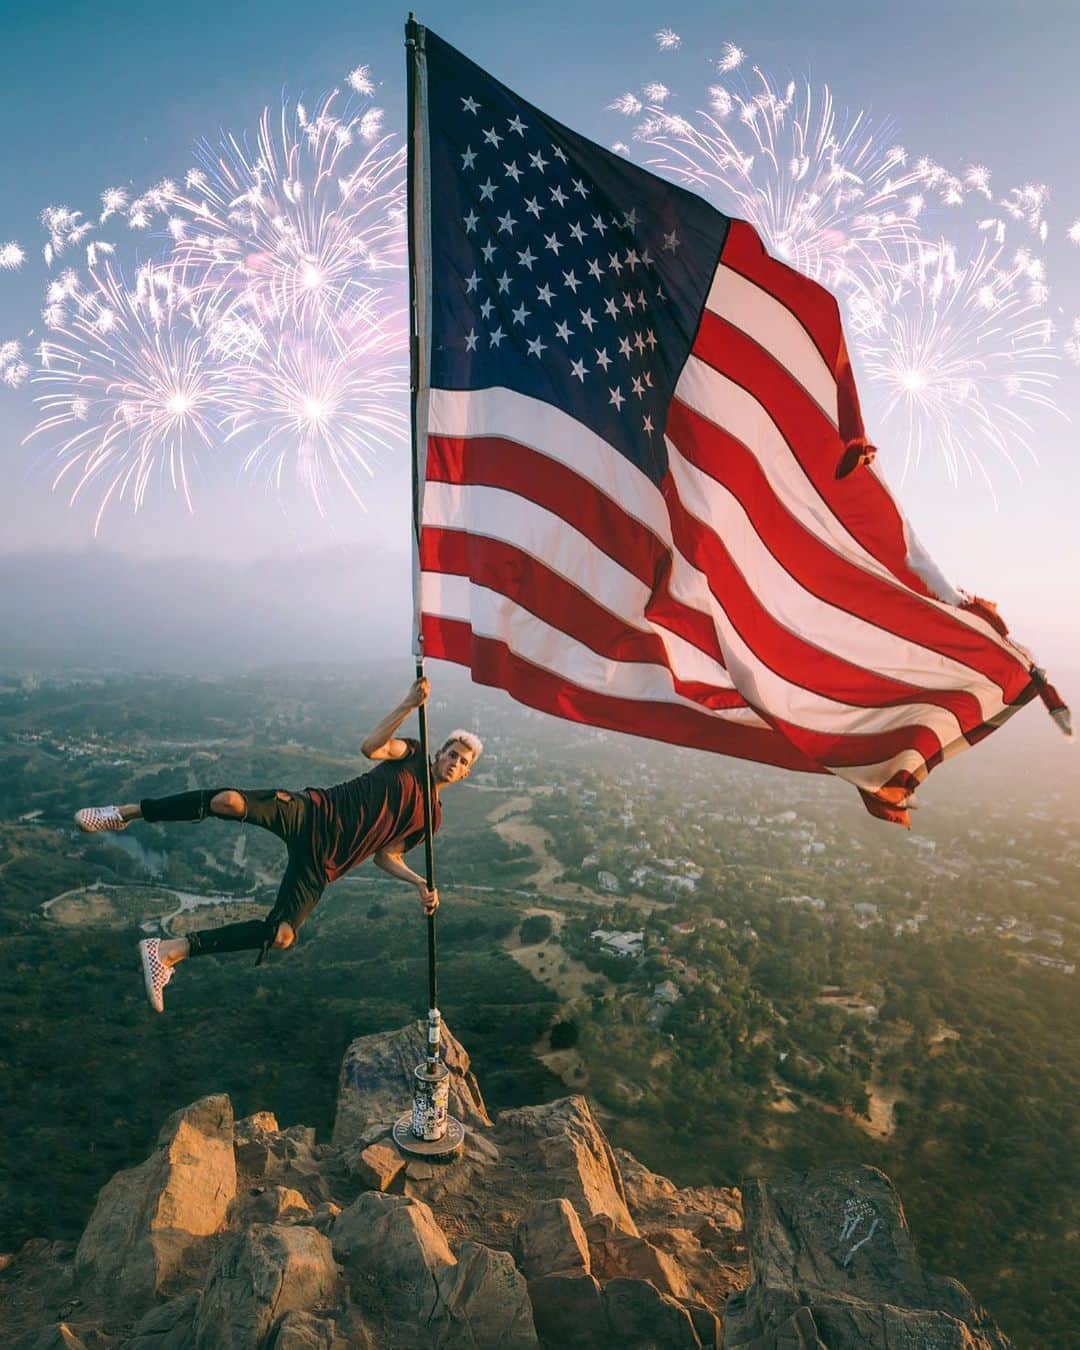 Mark Dohnerのインスタグラム：「Happy Memorial Day #Merica! 🇺🇸 huge appreciation to those who have lost their lives fighting for our country... let’s hope that one day we can all achieve WORLD PEACE so there are no wars 🙏🏼 #EverybodyLoveEverybody」